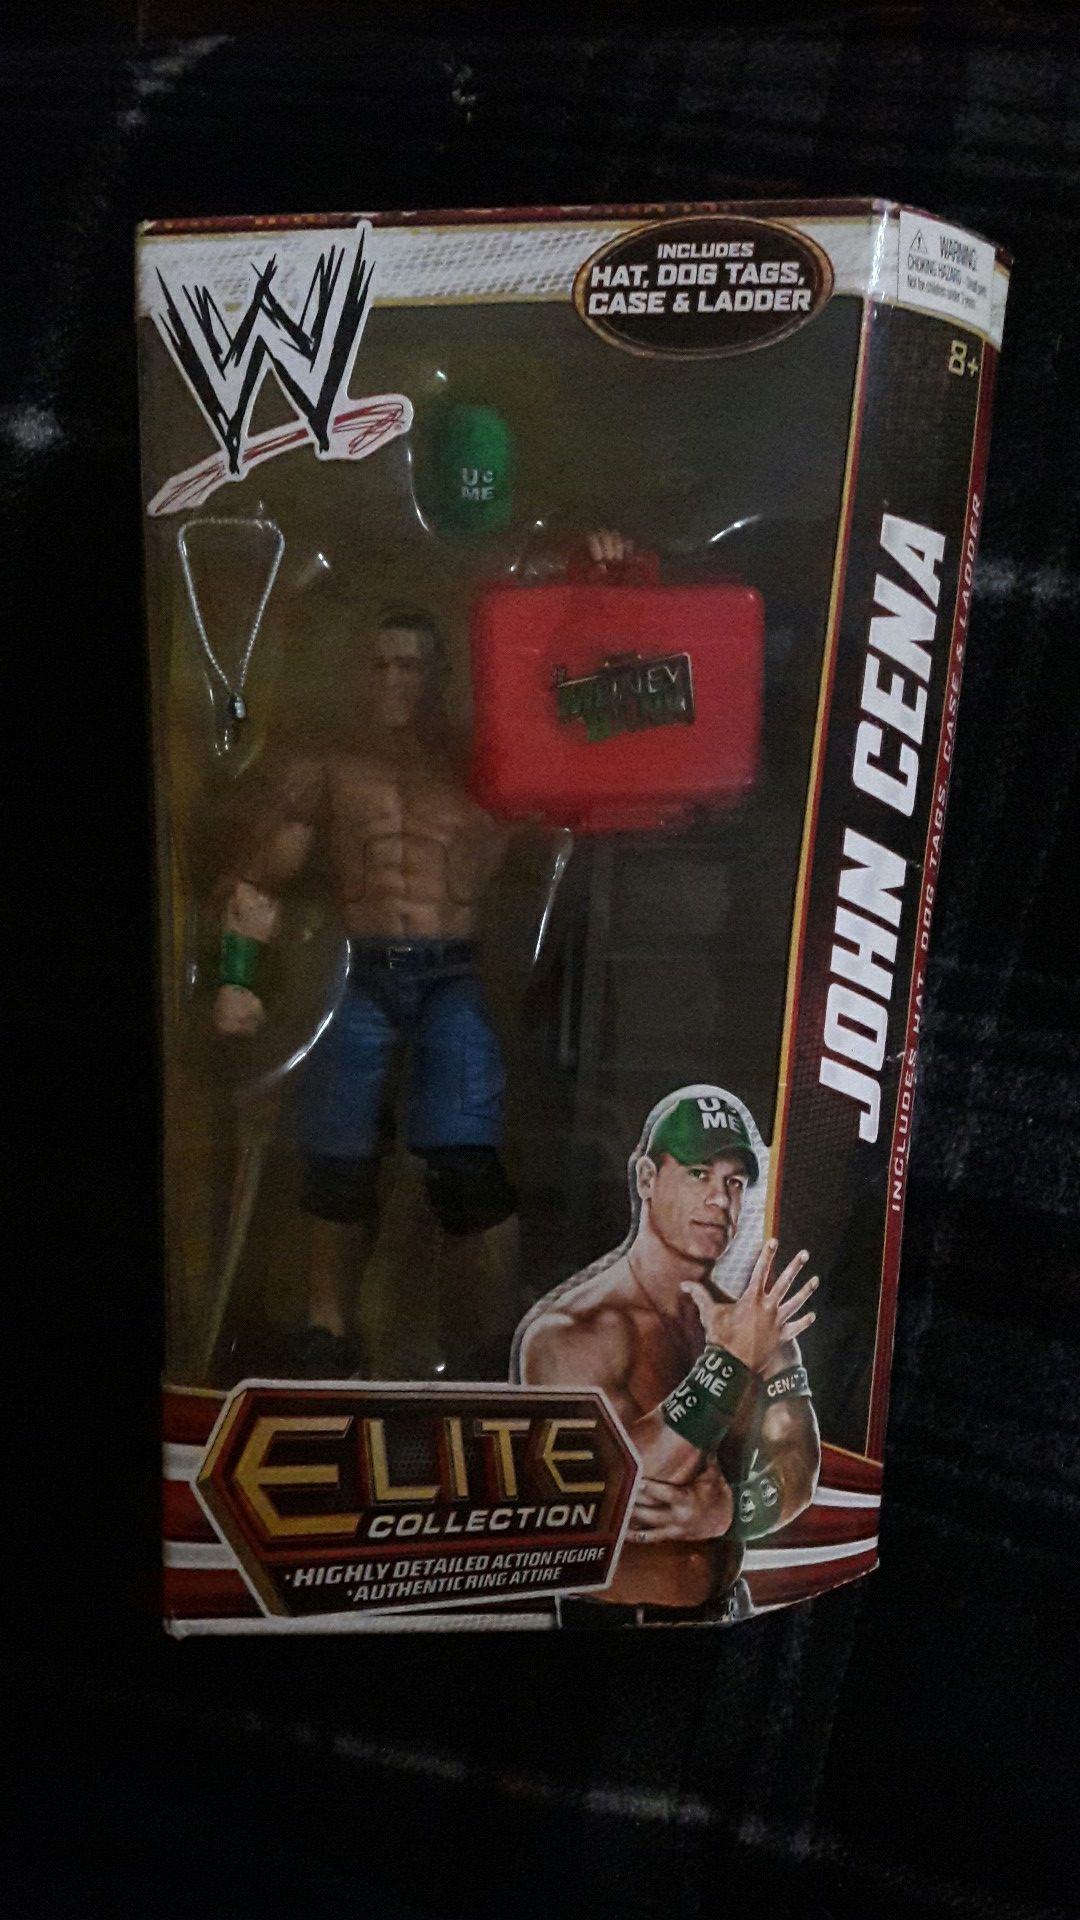 WWE John Cena the action figure, ladder, dented briefcase, hat, and tags!!